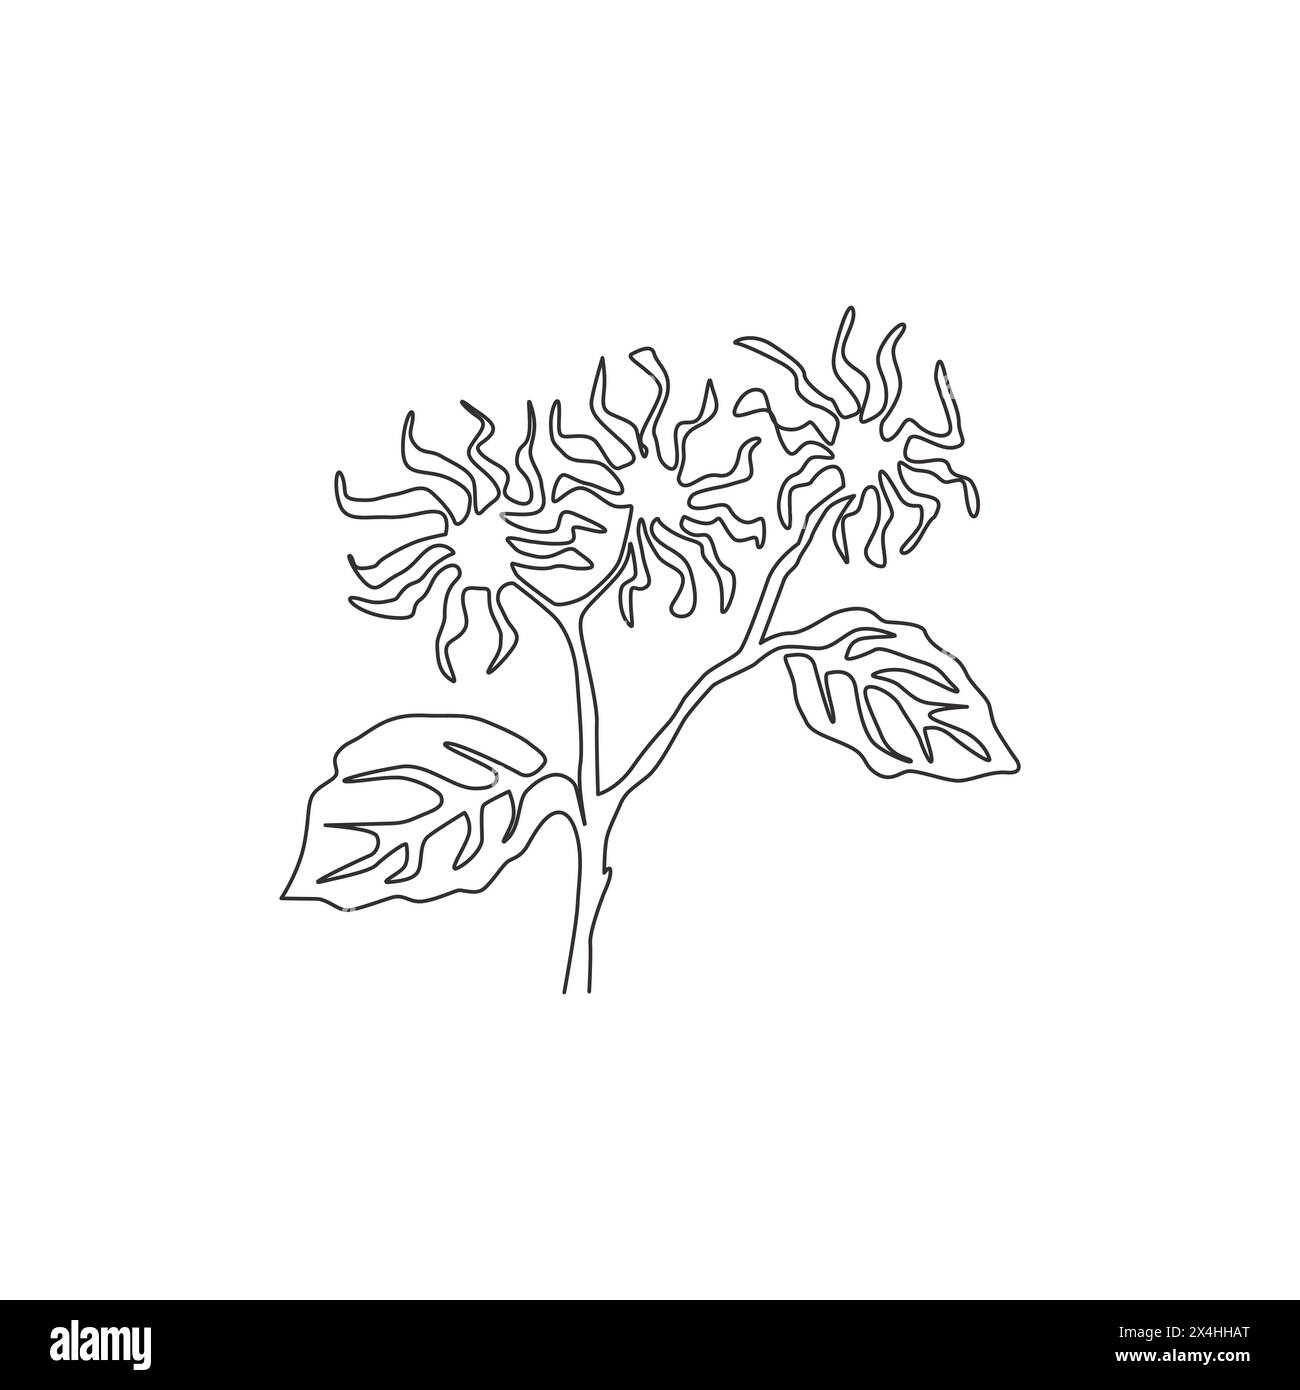 Single one line drawing beauty fresh witch hazels for garden logo. Decorative of winterbloom flower concept for home wall decor art poster print. Mode Stock Vector